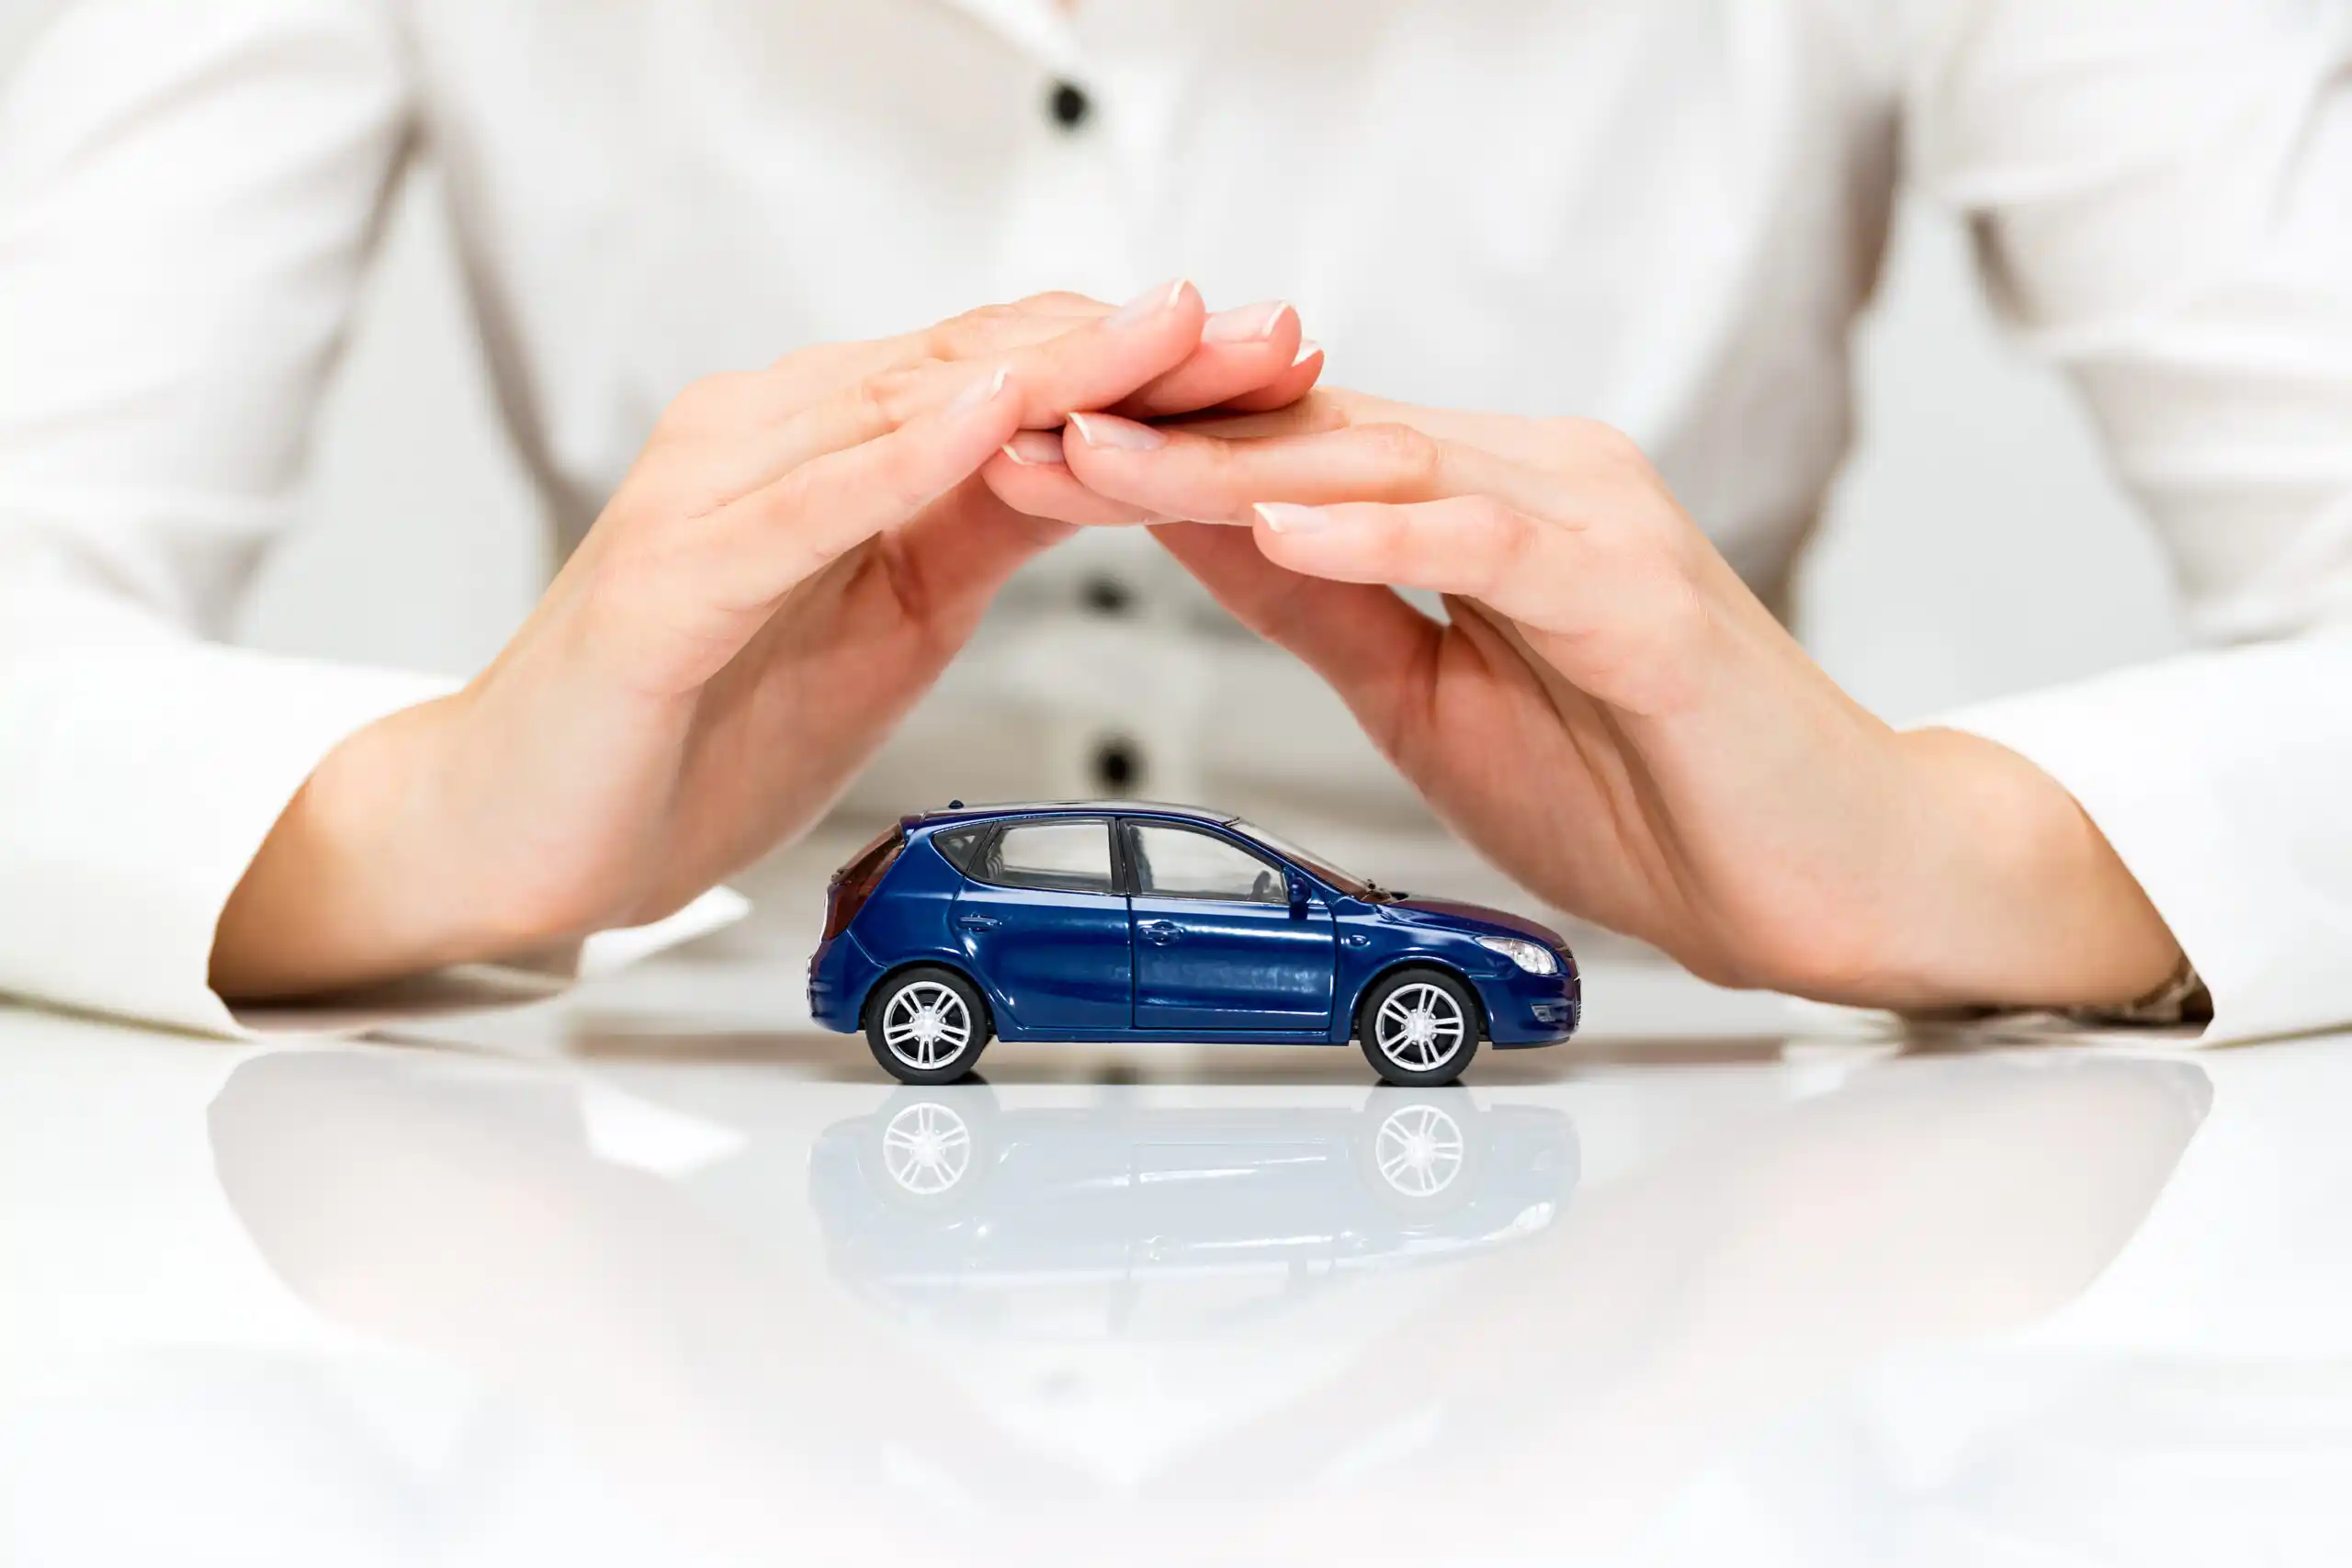 Temporary Car Insurance: What Are Your Best Options?